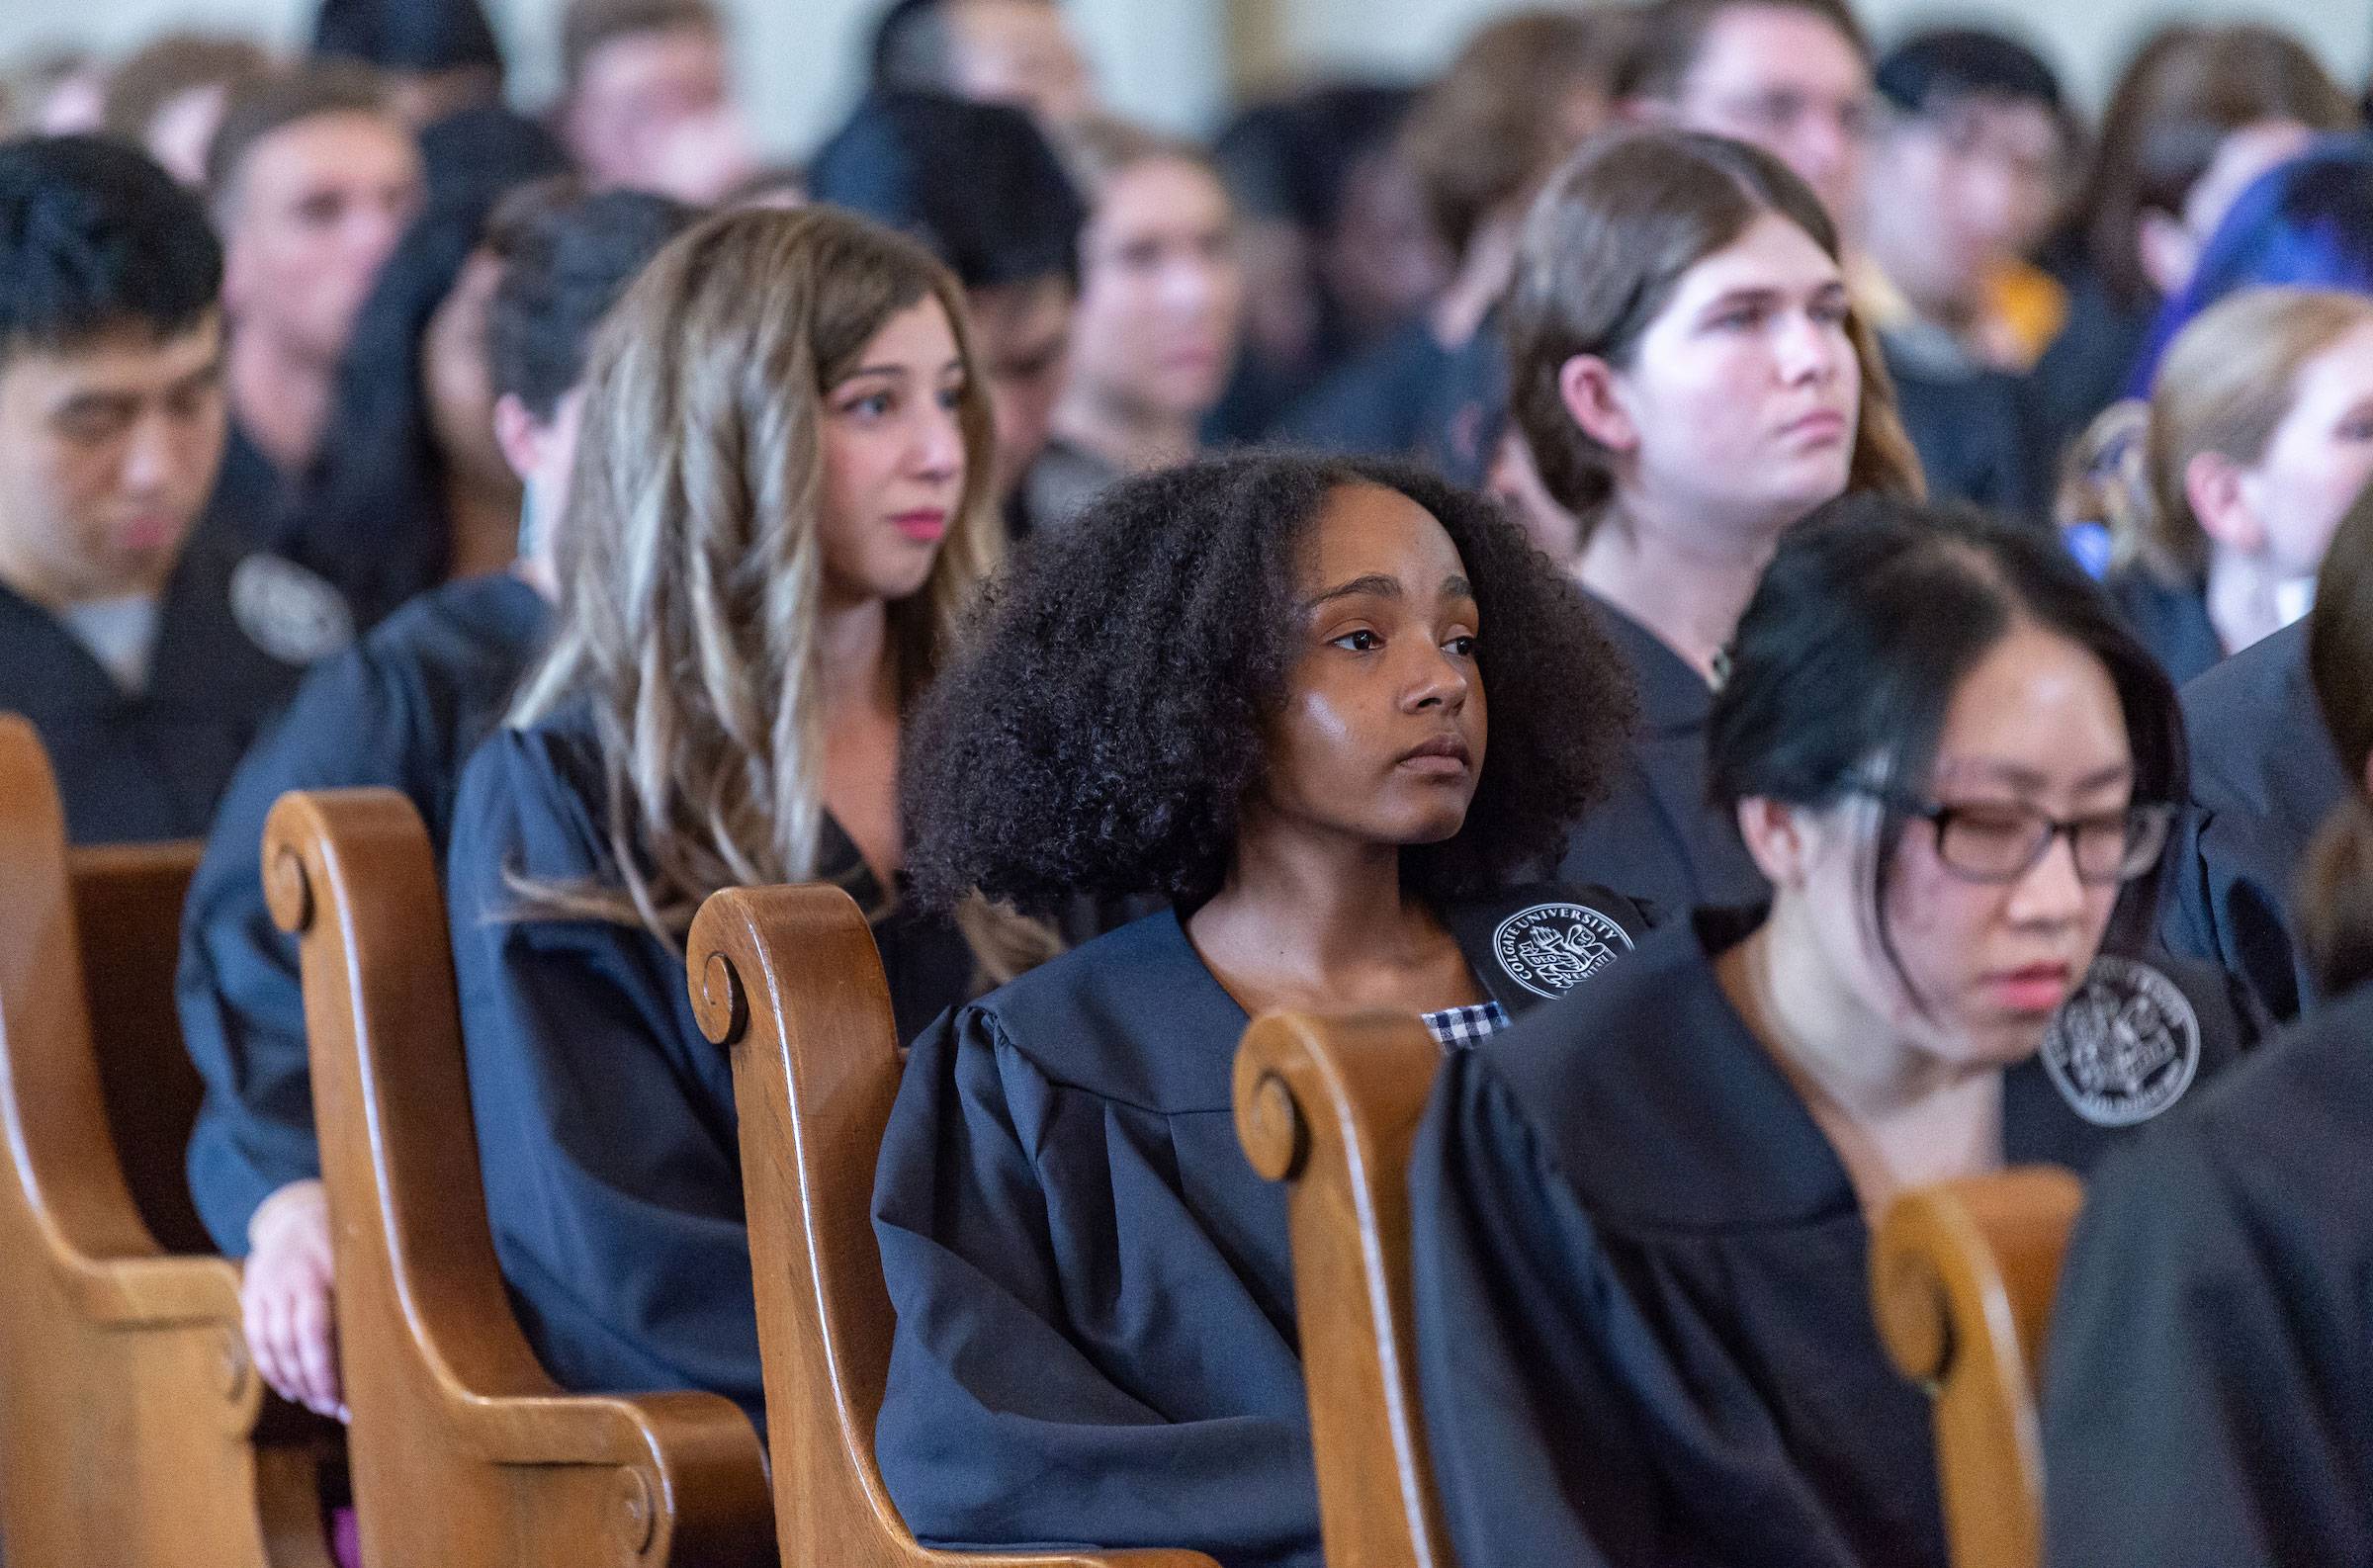 Students in commencement robes sitting in chapel pews watching the Baccalaureate Servcie